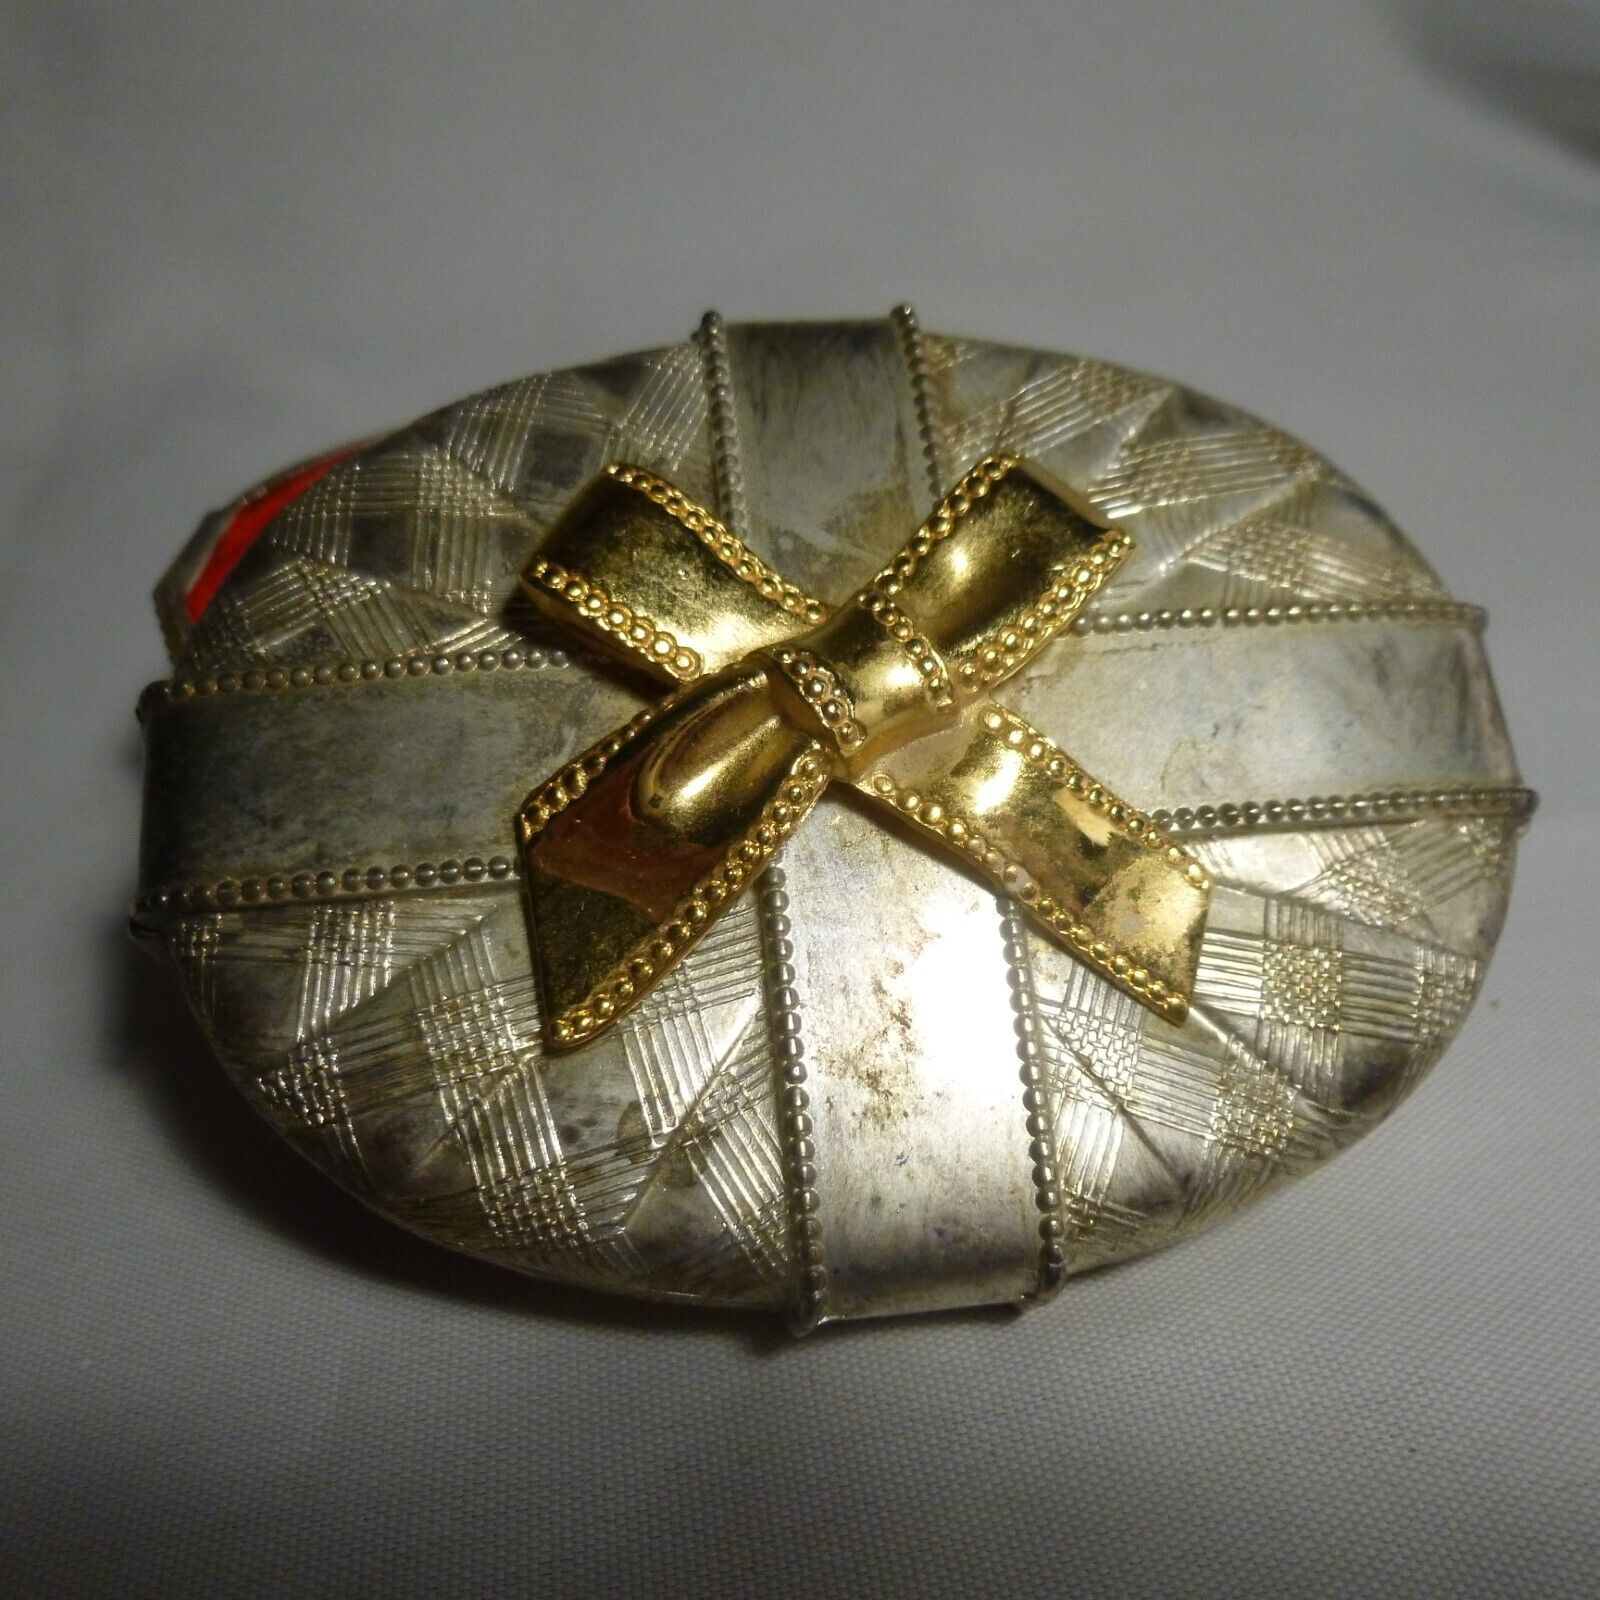 Trinket Box - silver & gold plated Metal by Godinger Silver Art Co - EUC